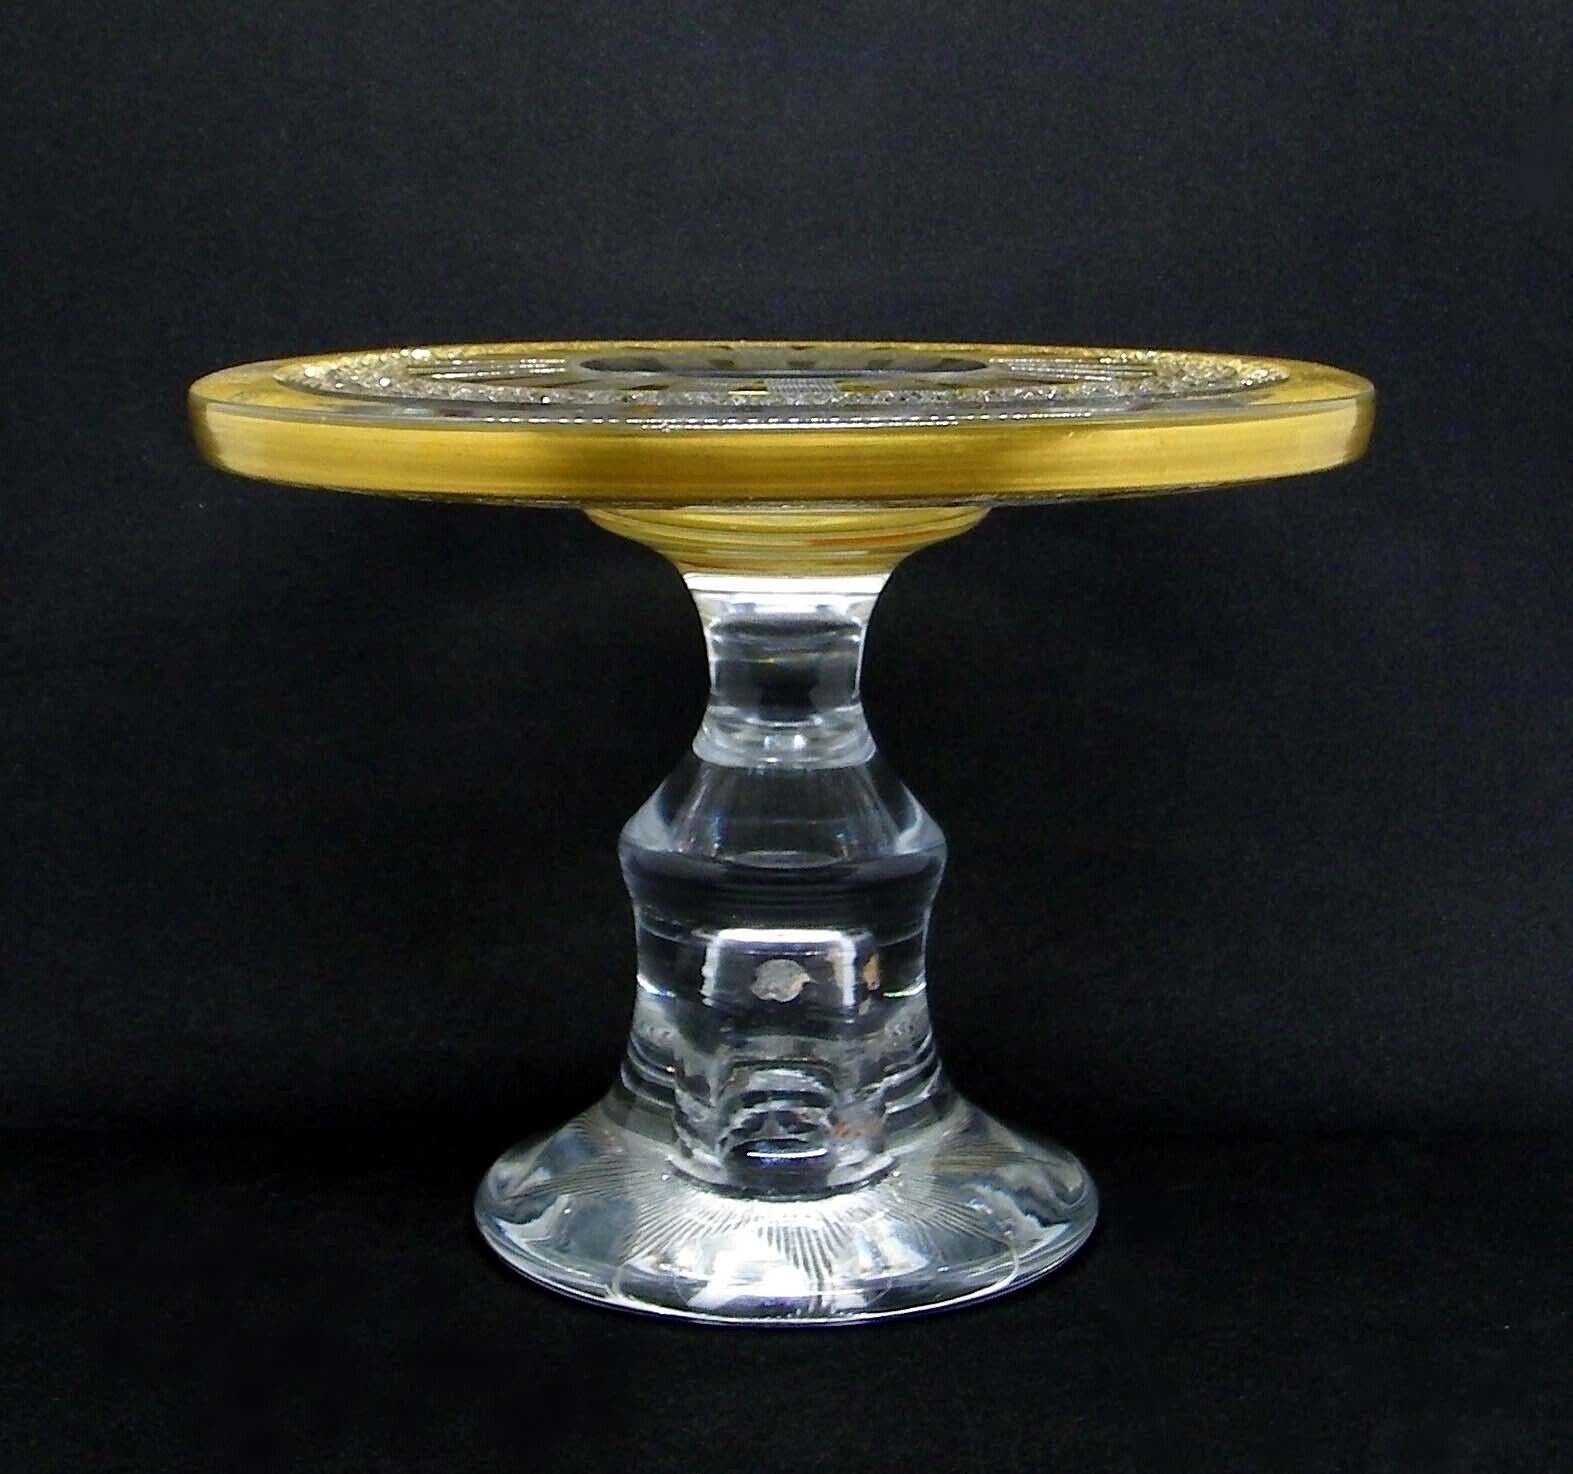 19thc French Empire Gold Bordered Crystal Candle Holder /Candlestick by Baccarat In Good Condition For Sale In Opa Locka, FL